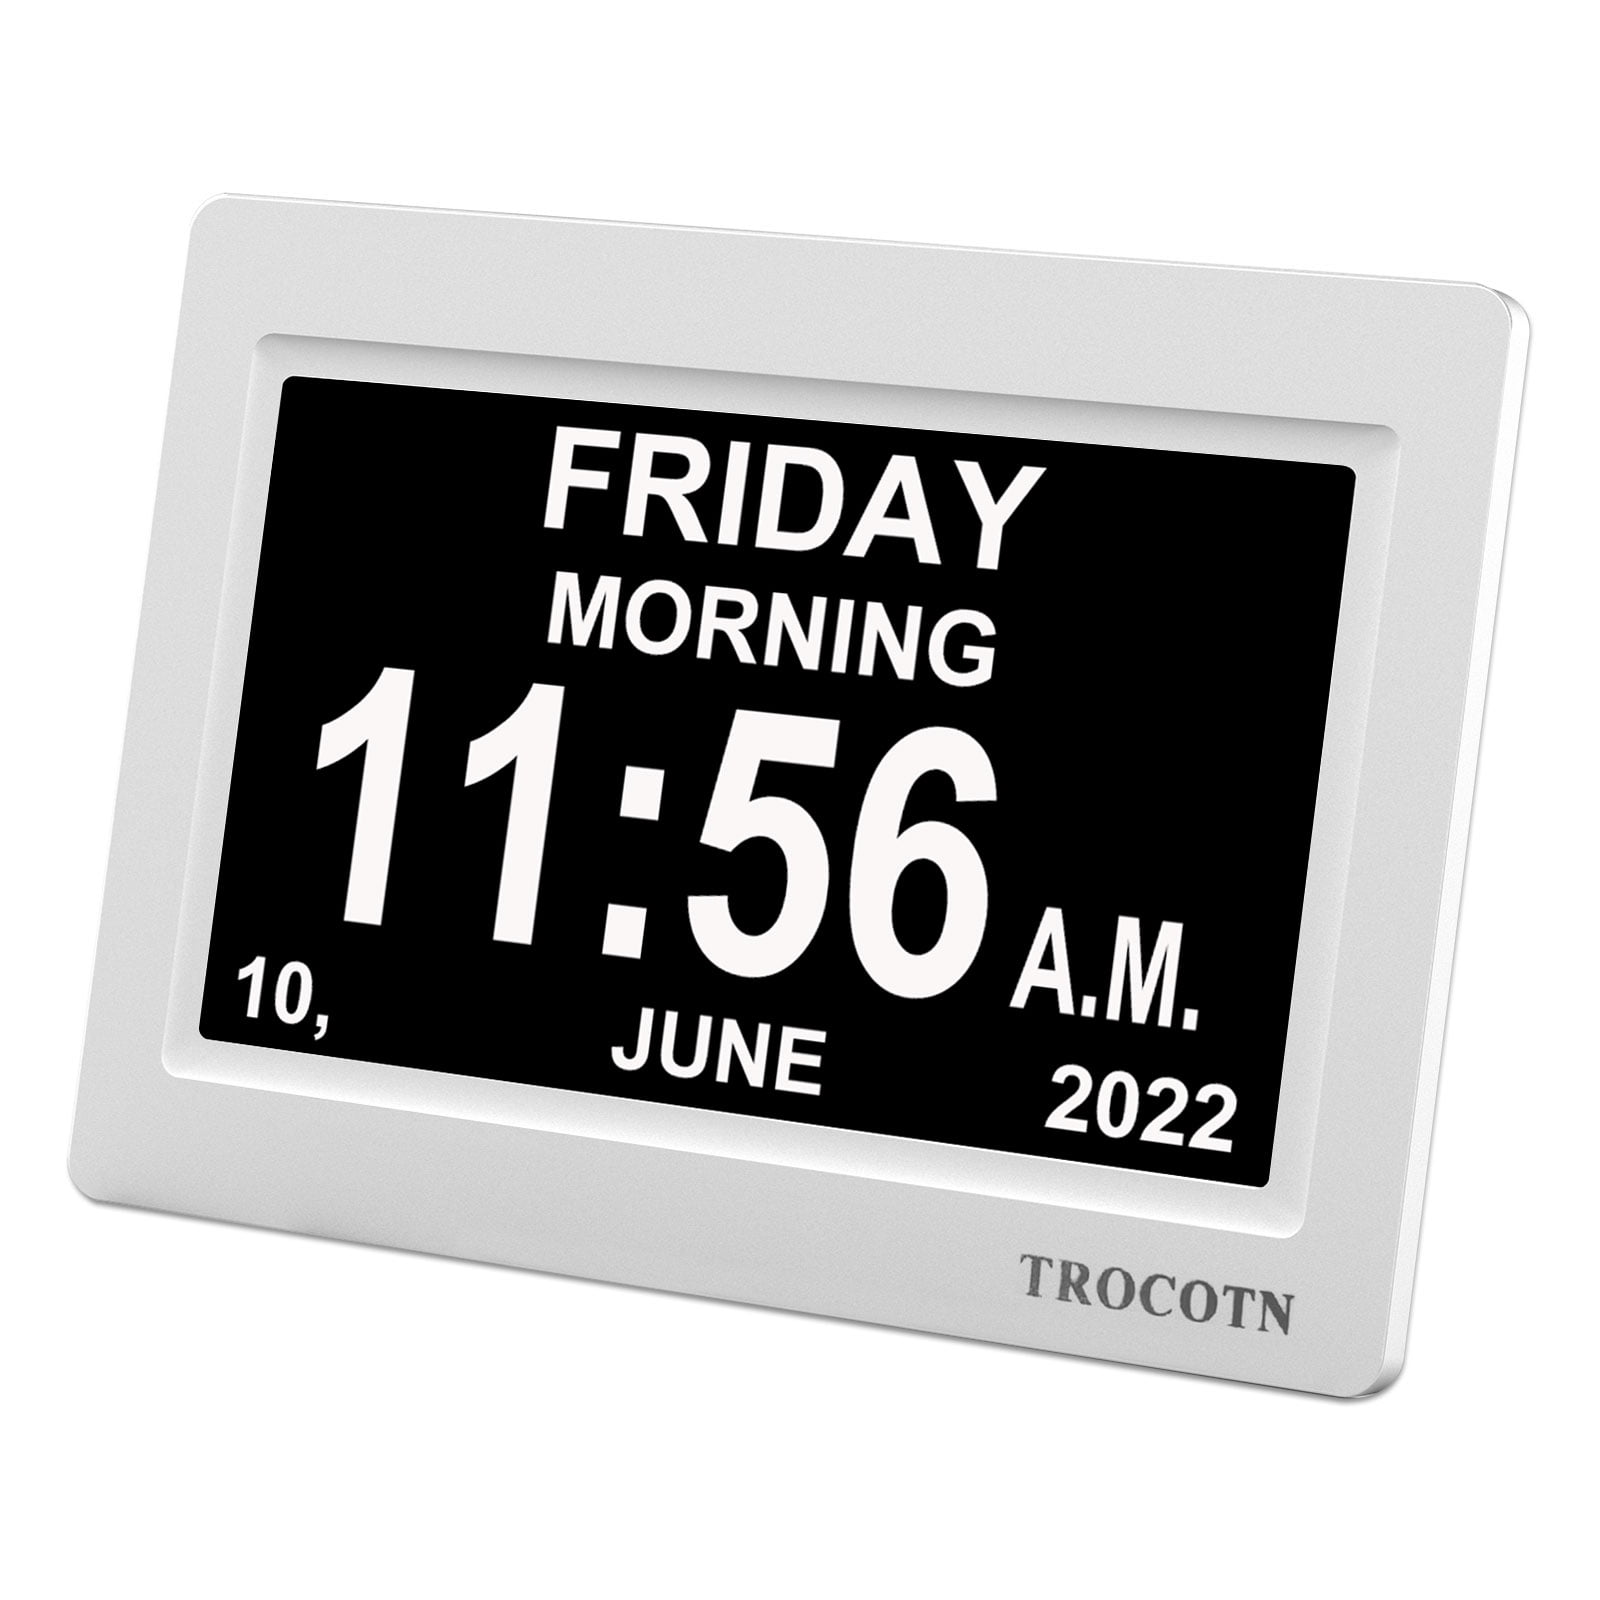 Mainstays Black Digital Alarm Clock with LED Backlight and Easy-to-Read LCD  Display